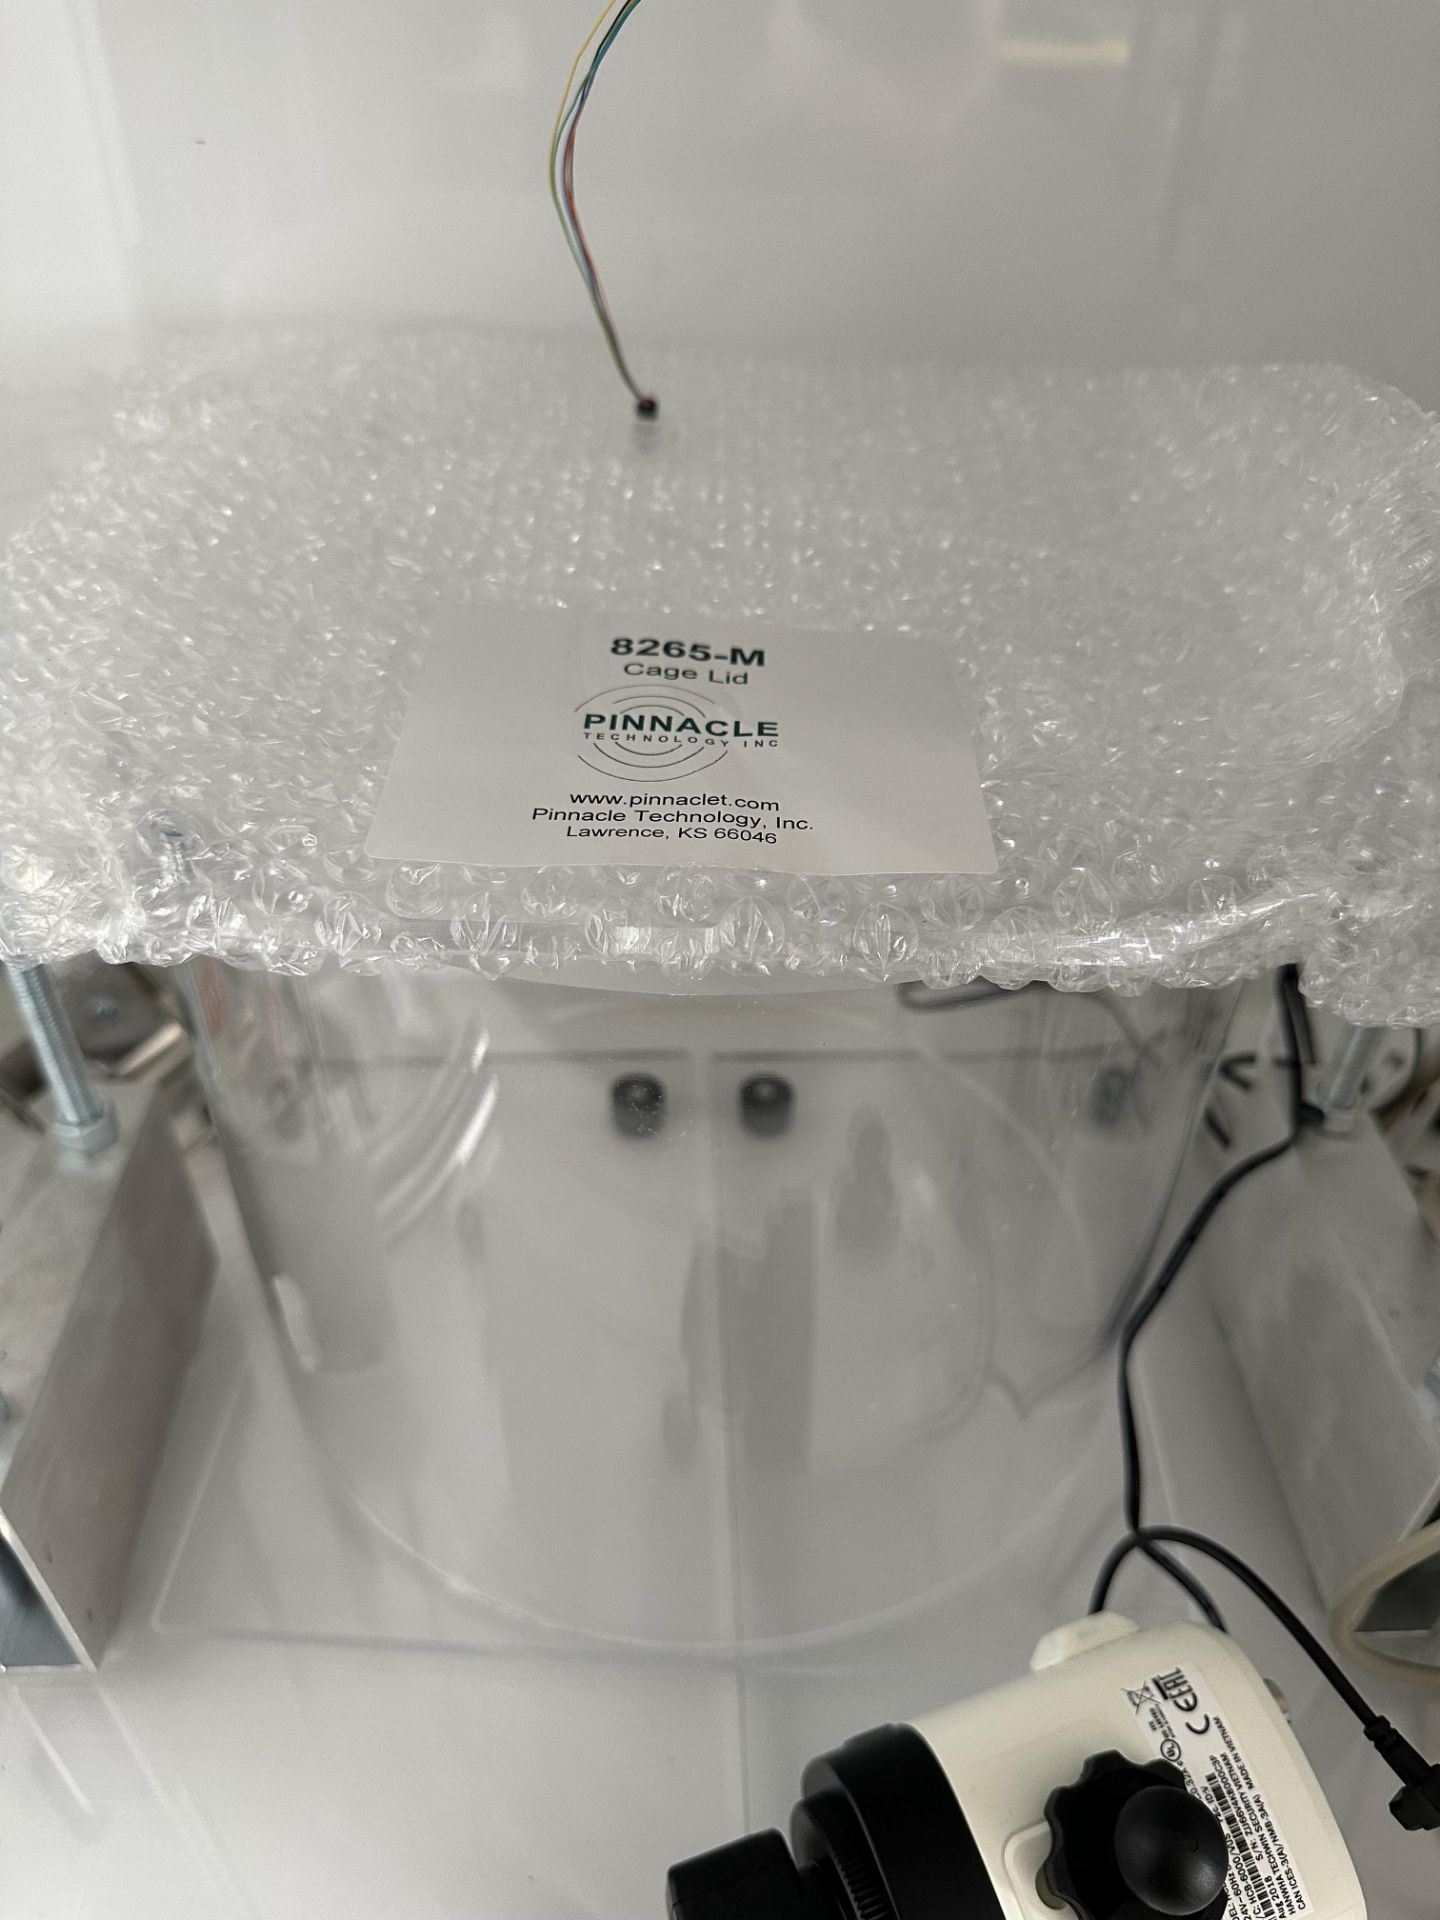 Harvard Apparatus Panlab Isolation Box Behavioral Chamber with LIXIT feeder and Pinnacle model - Image 2 of 6